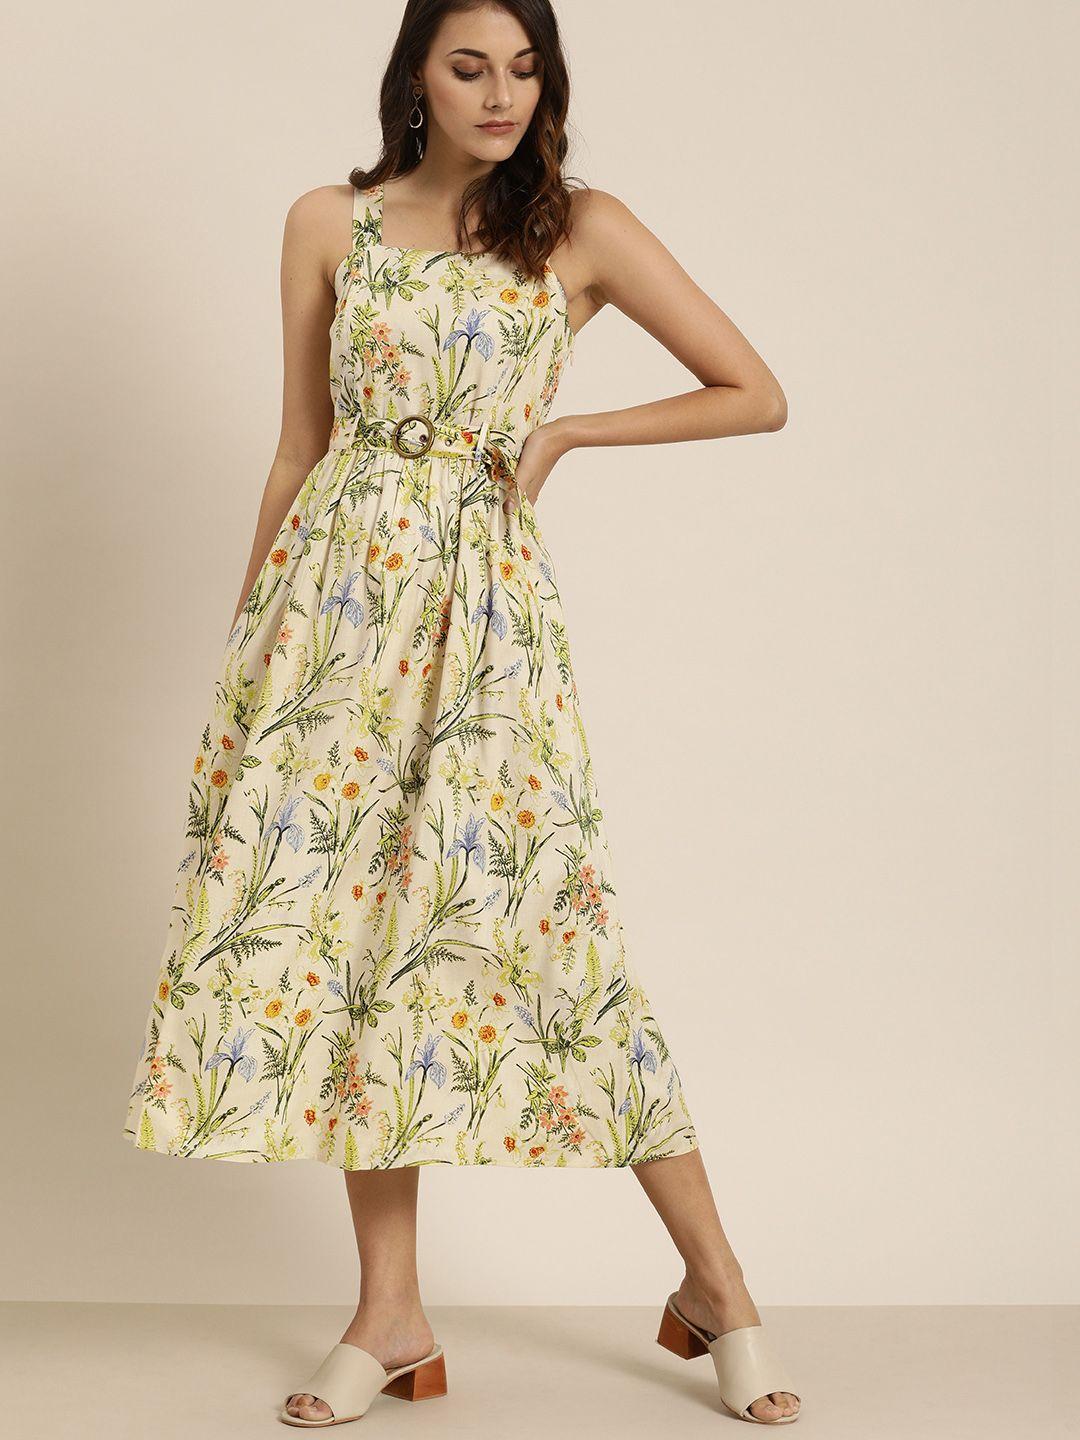 all about you cream-coloured & green floral printed a-line dress